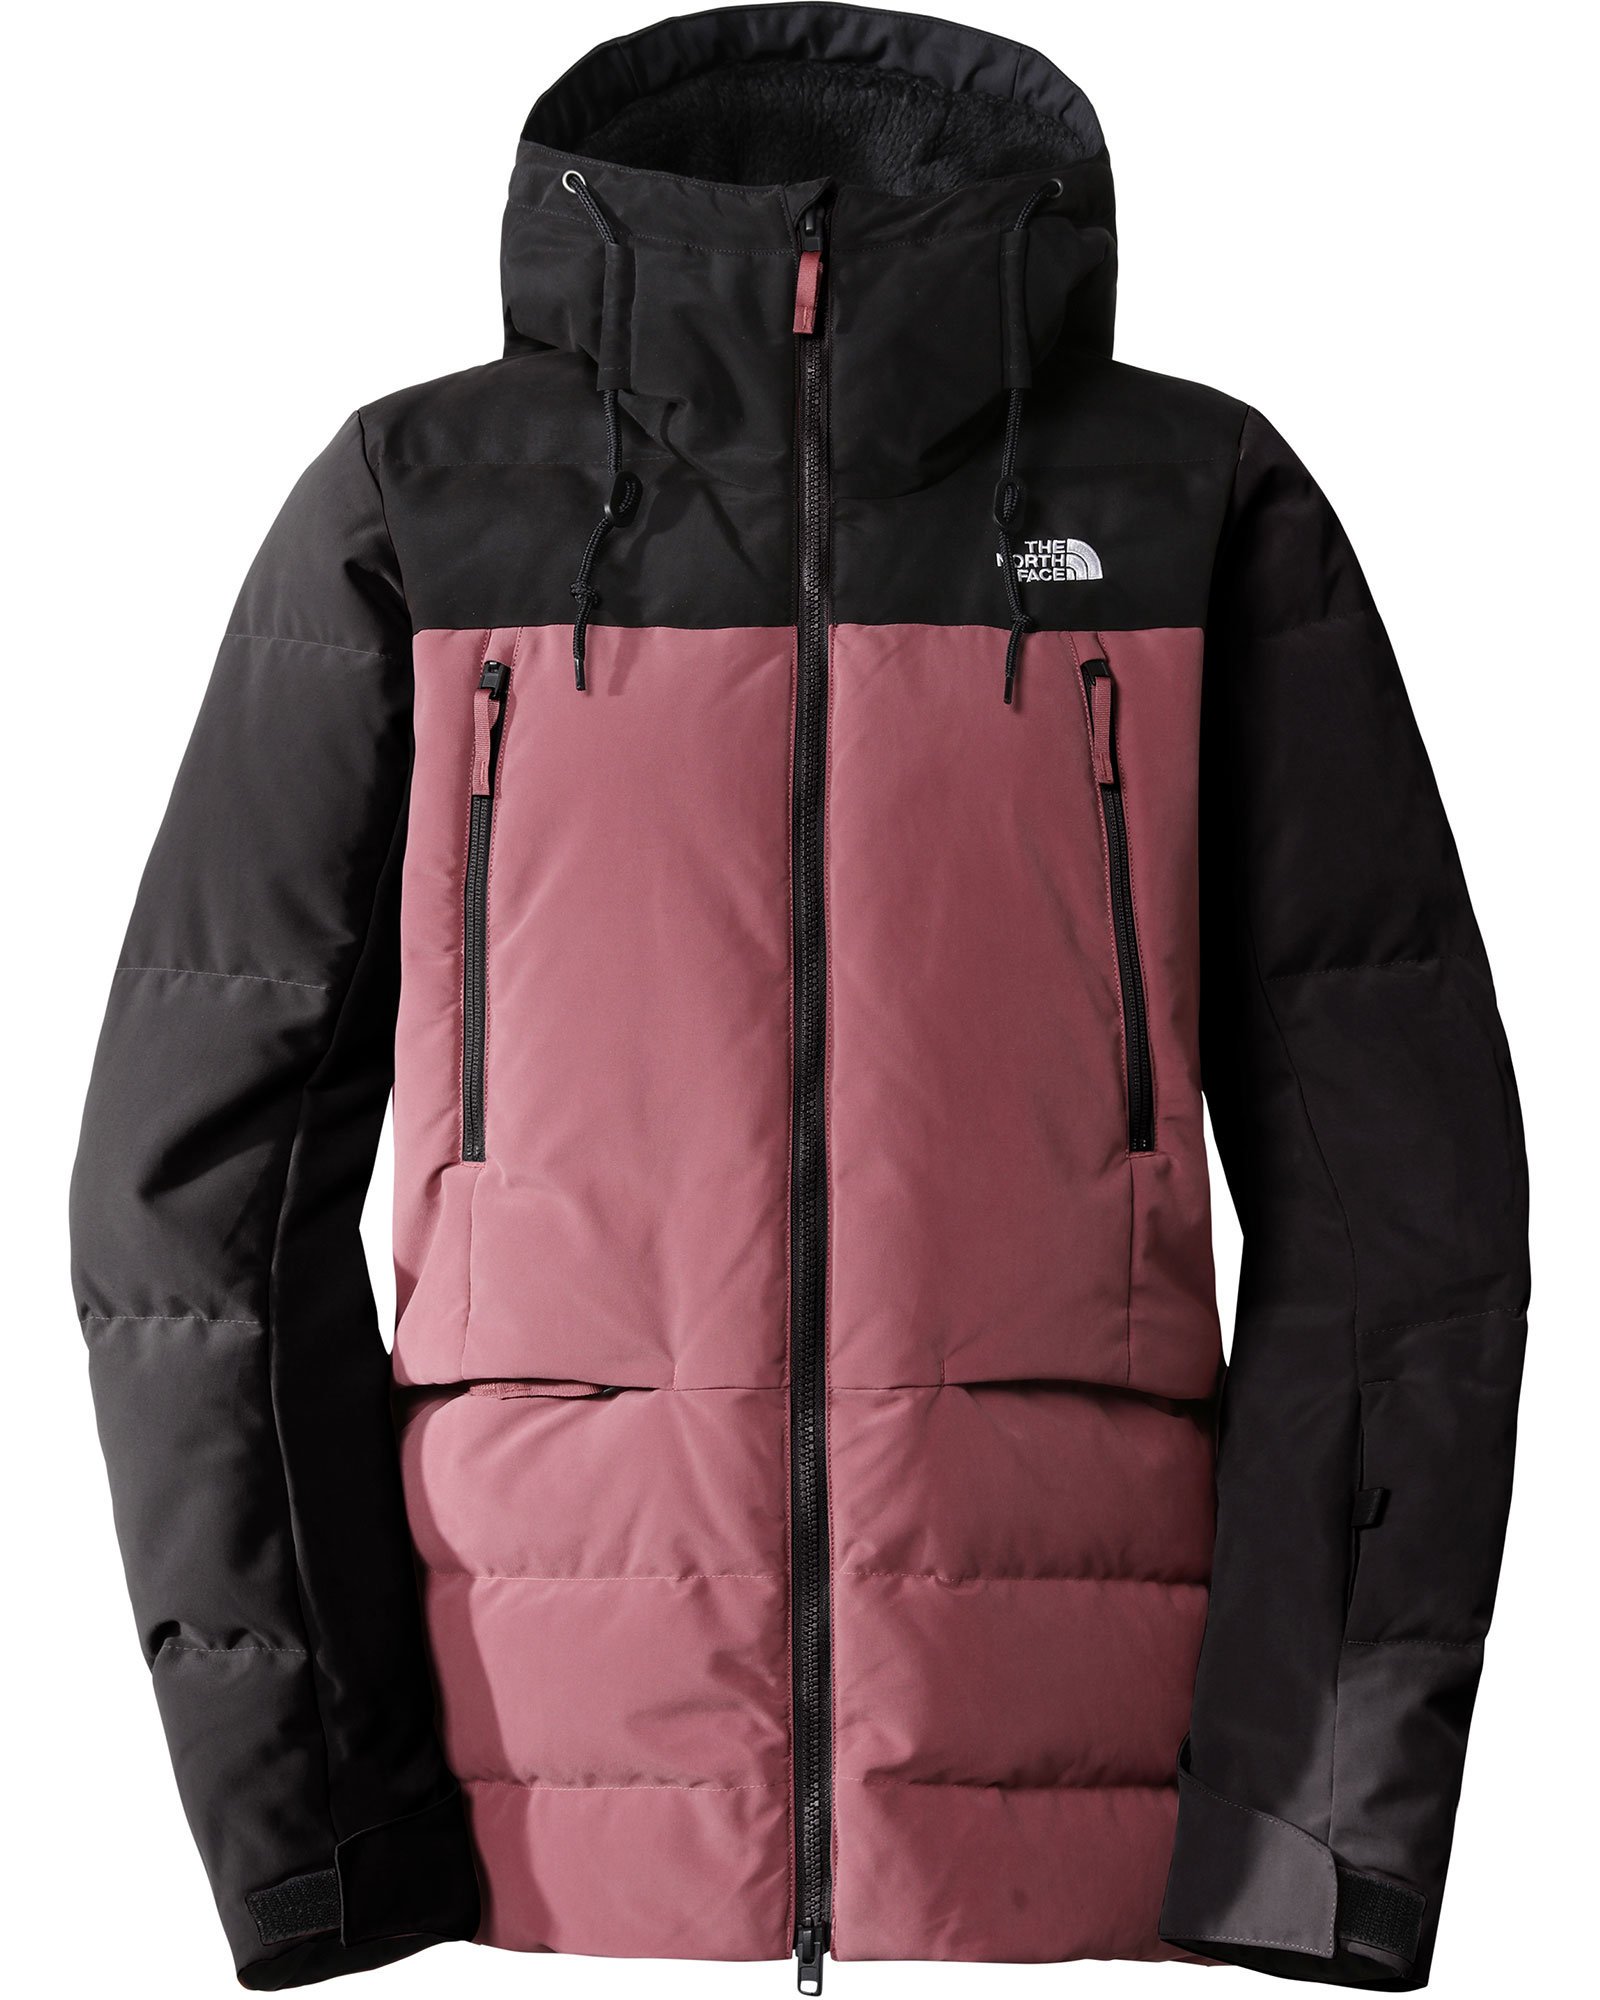 Product image of The North Face Pallie Women's Jacket